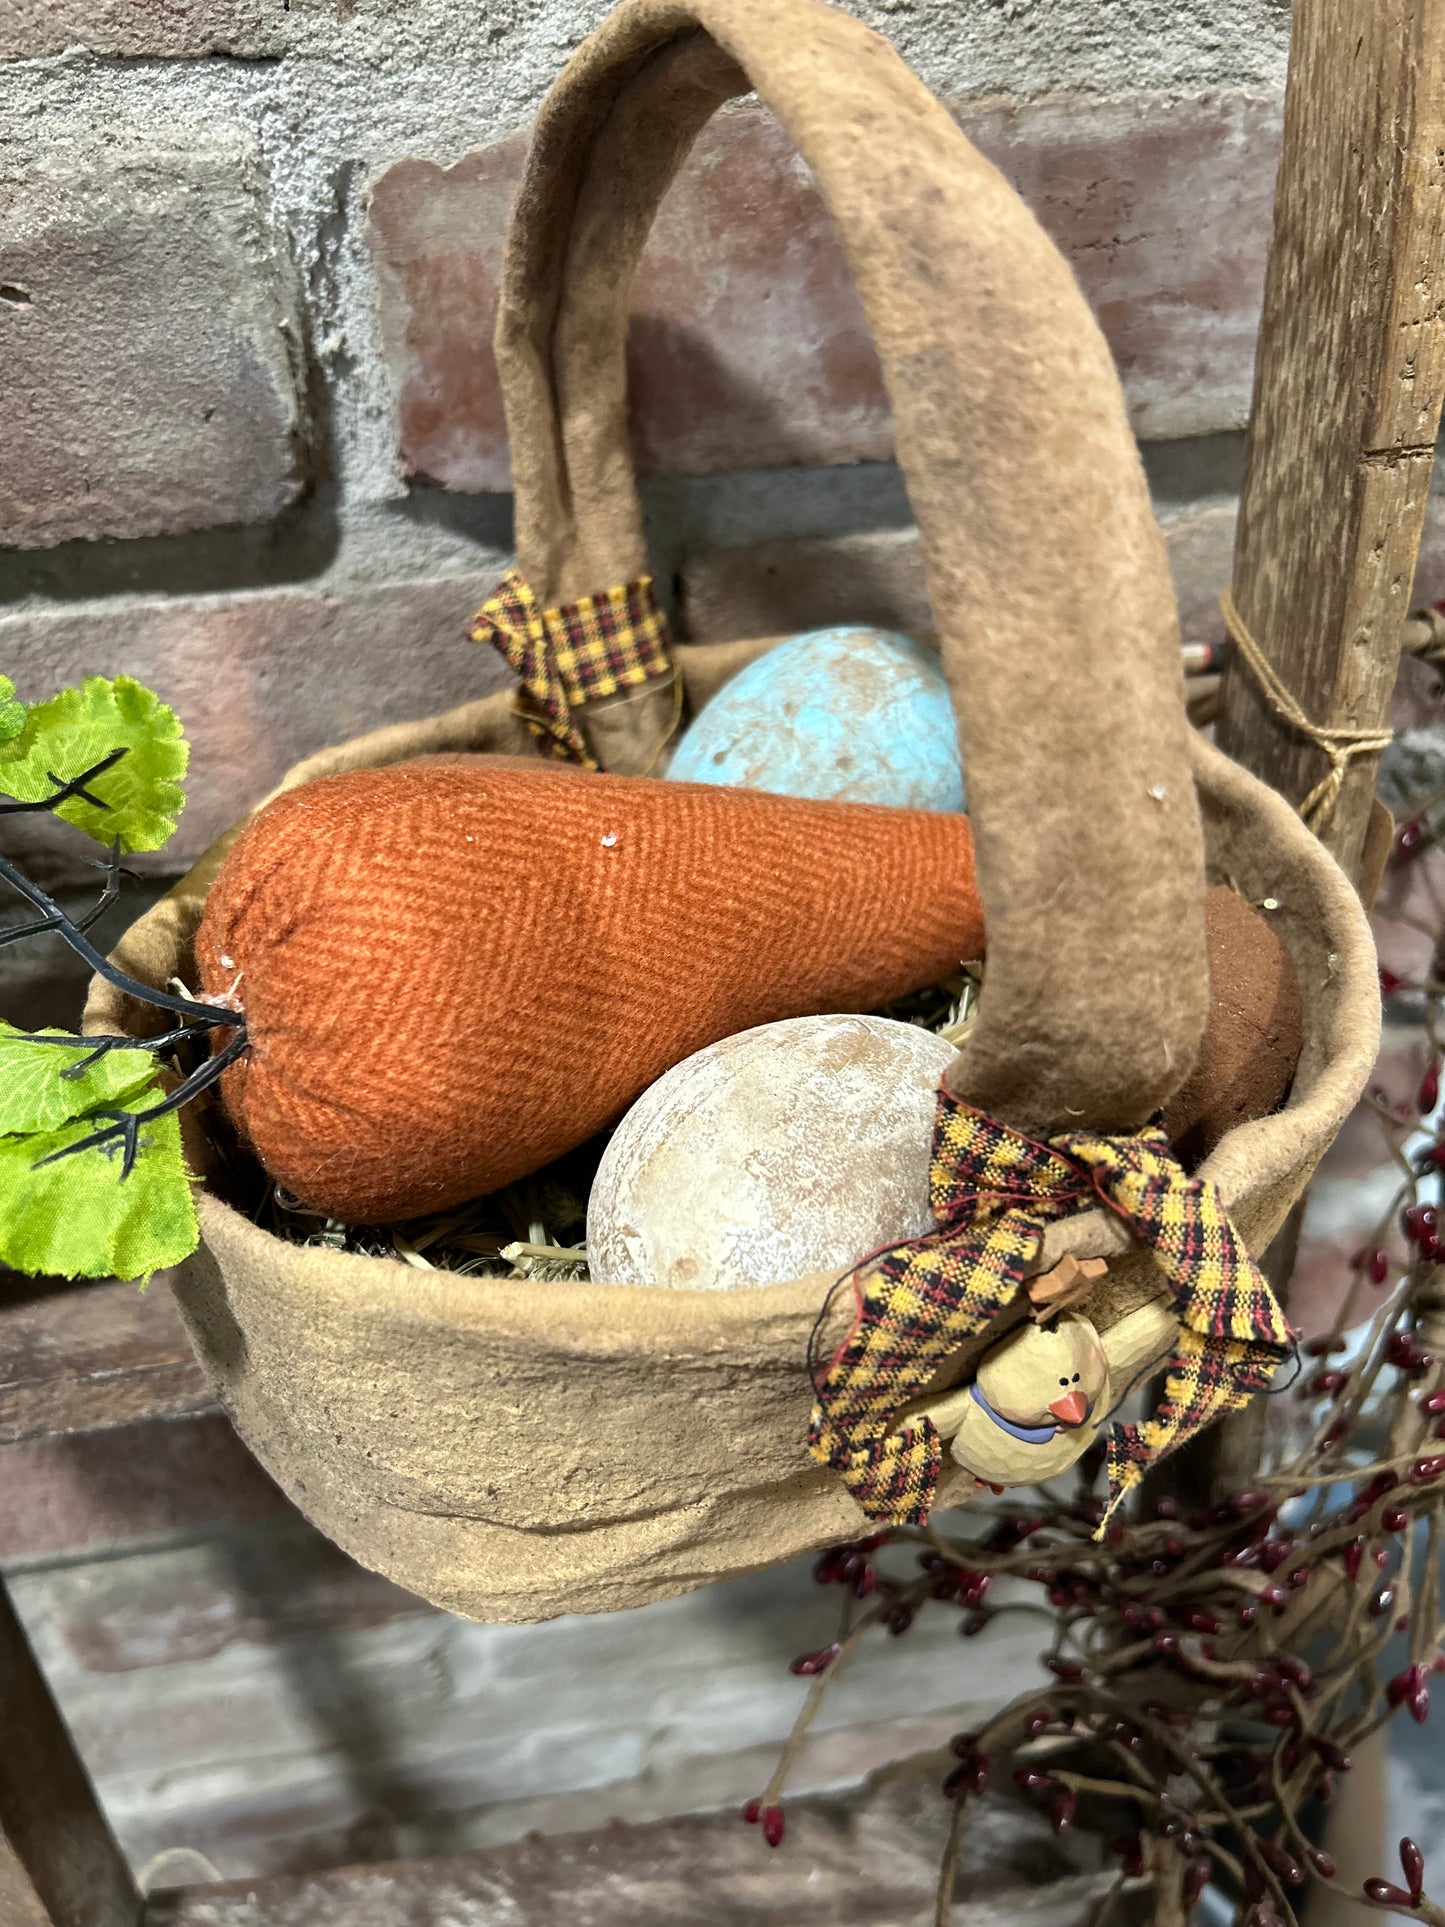 Handmade Primitive Easter Basket with Eggs and Carrots, Farmhouse Easter Decor, Primitives